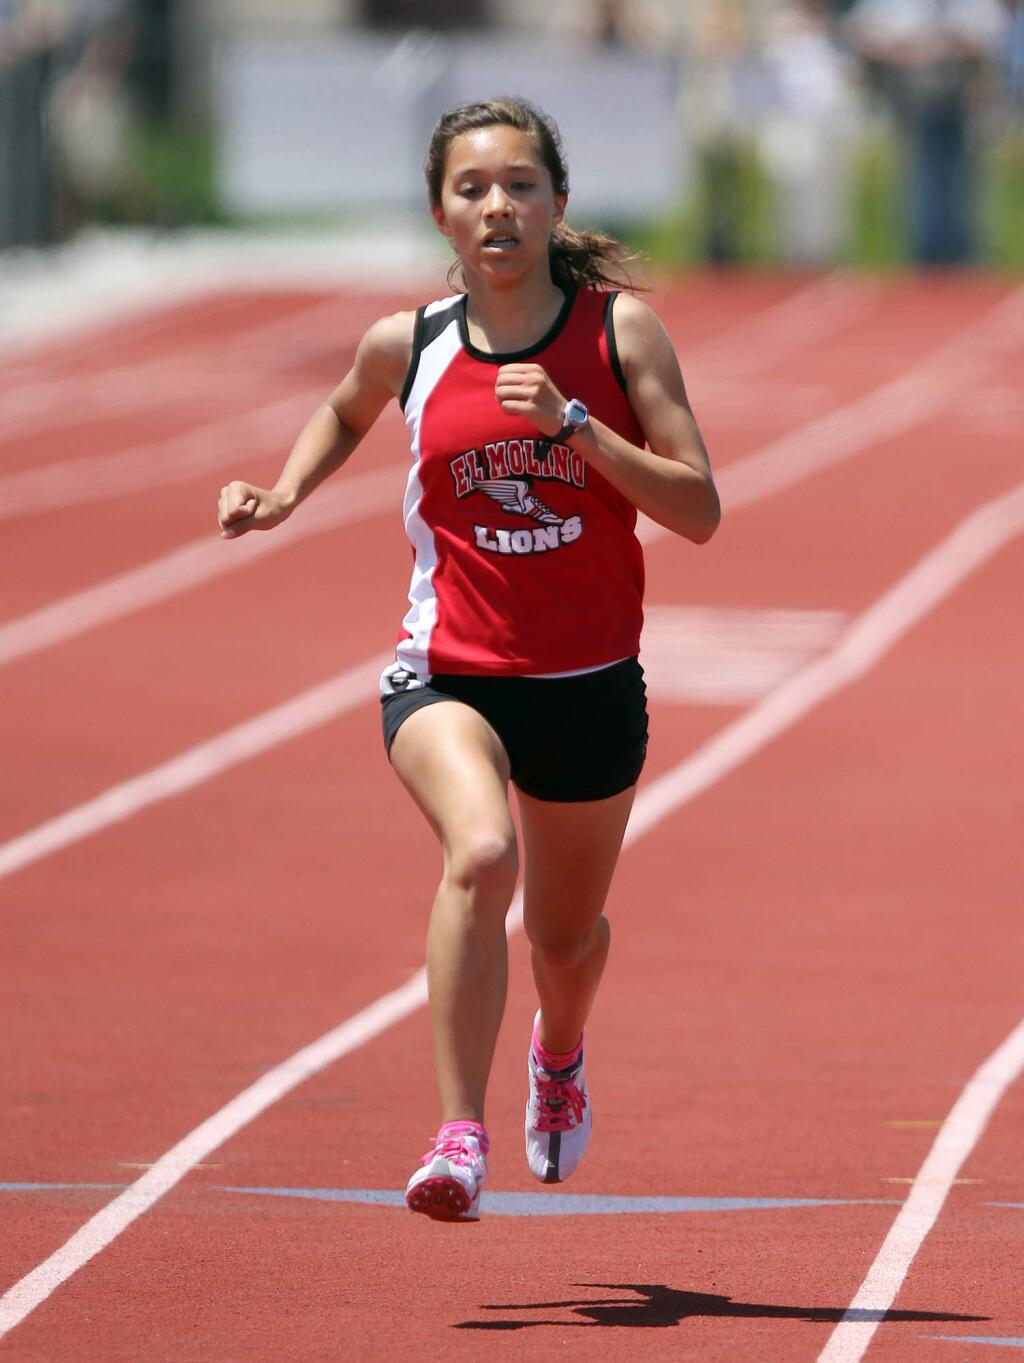 El Molino's Nicole Lane came in more then 10 seconds before the rest in the 3,200-meter run with a time of 11:17.67 during the NCS track meet held at Rancho Cotate High School, May 21, 2011. (PD File)